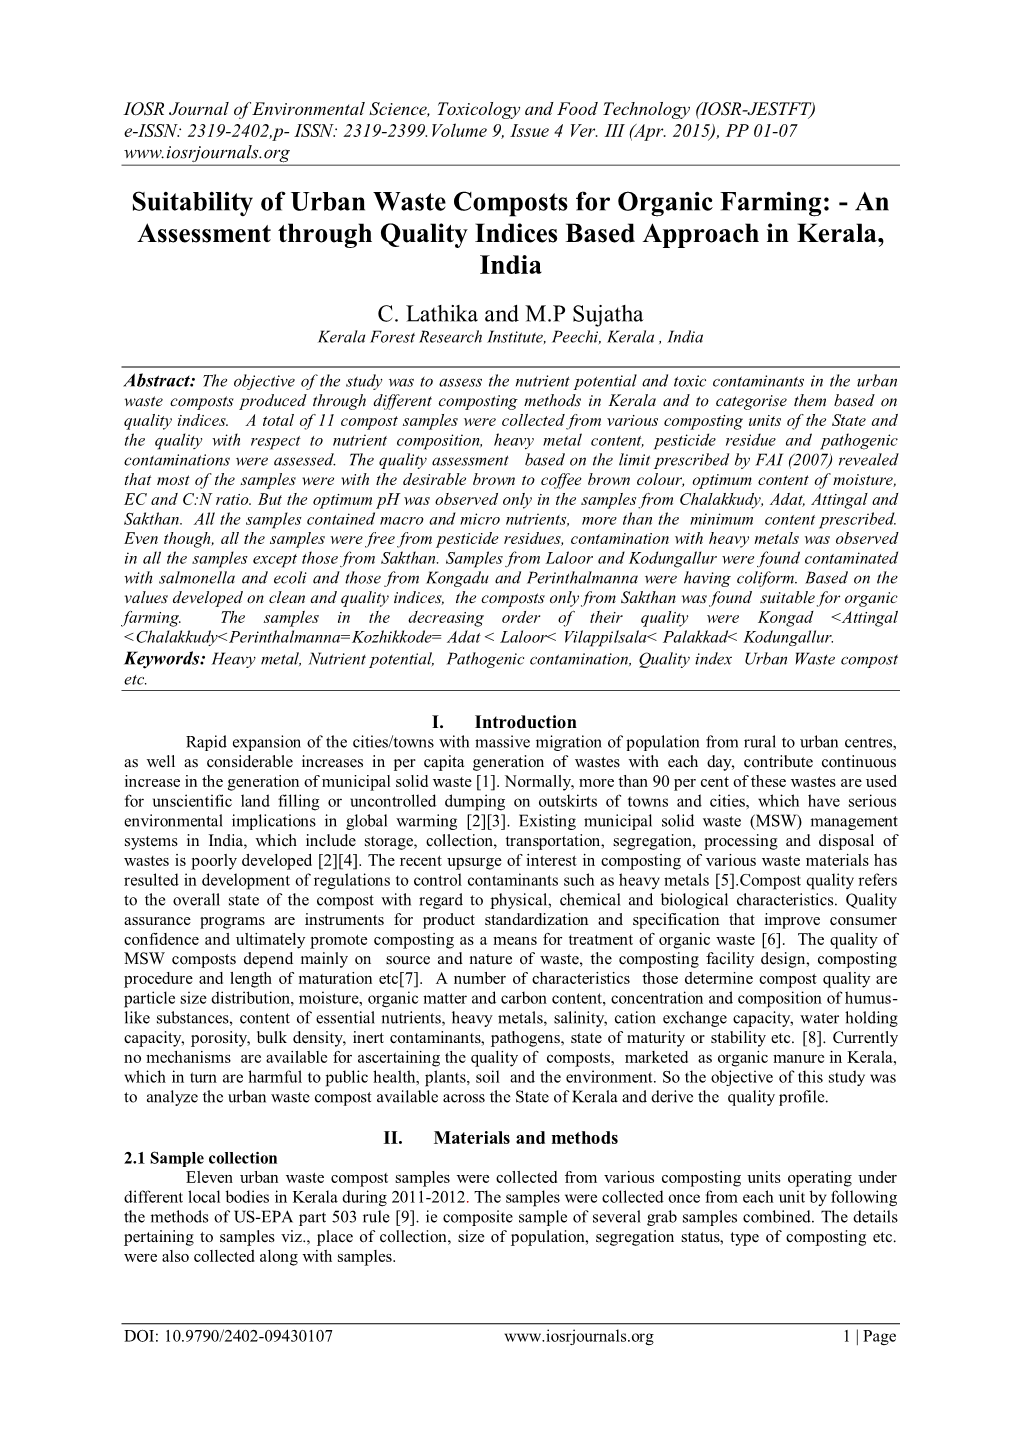 Suitability of Urban Waste Composts for Organic Farming: - an Assessment Through Quality Indices Based Approach in Kerala, India